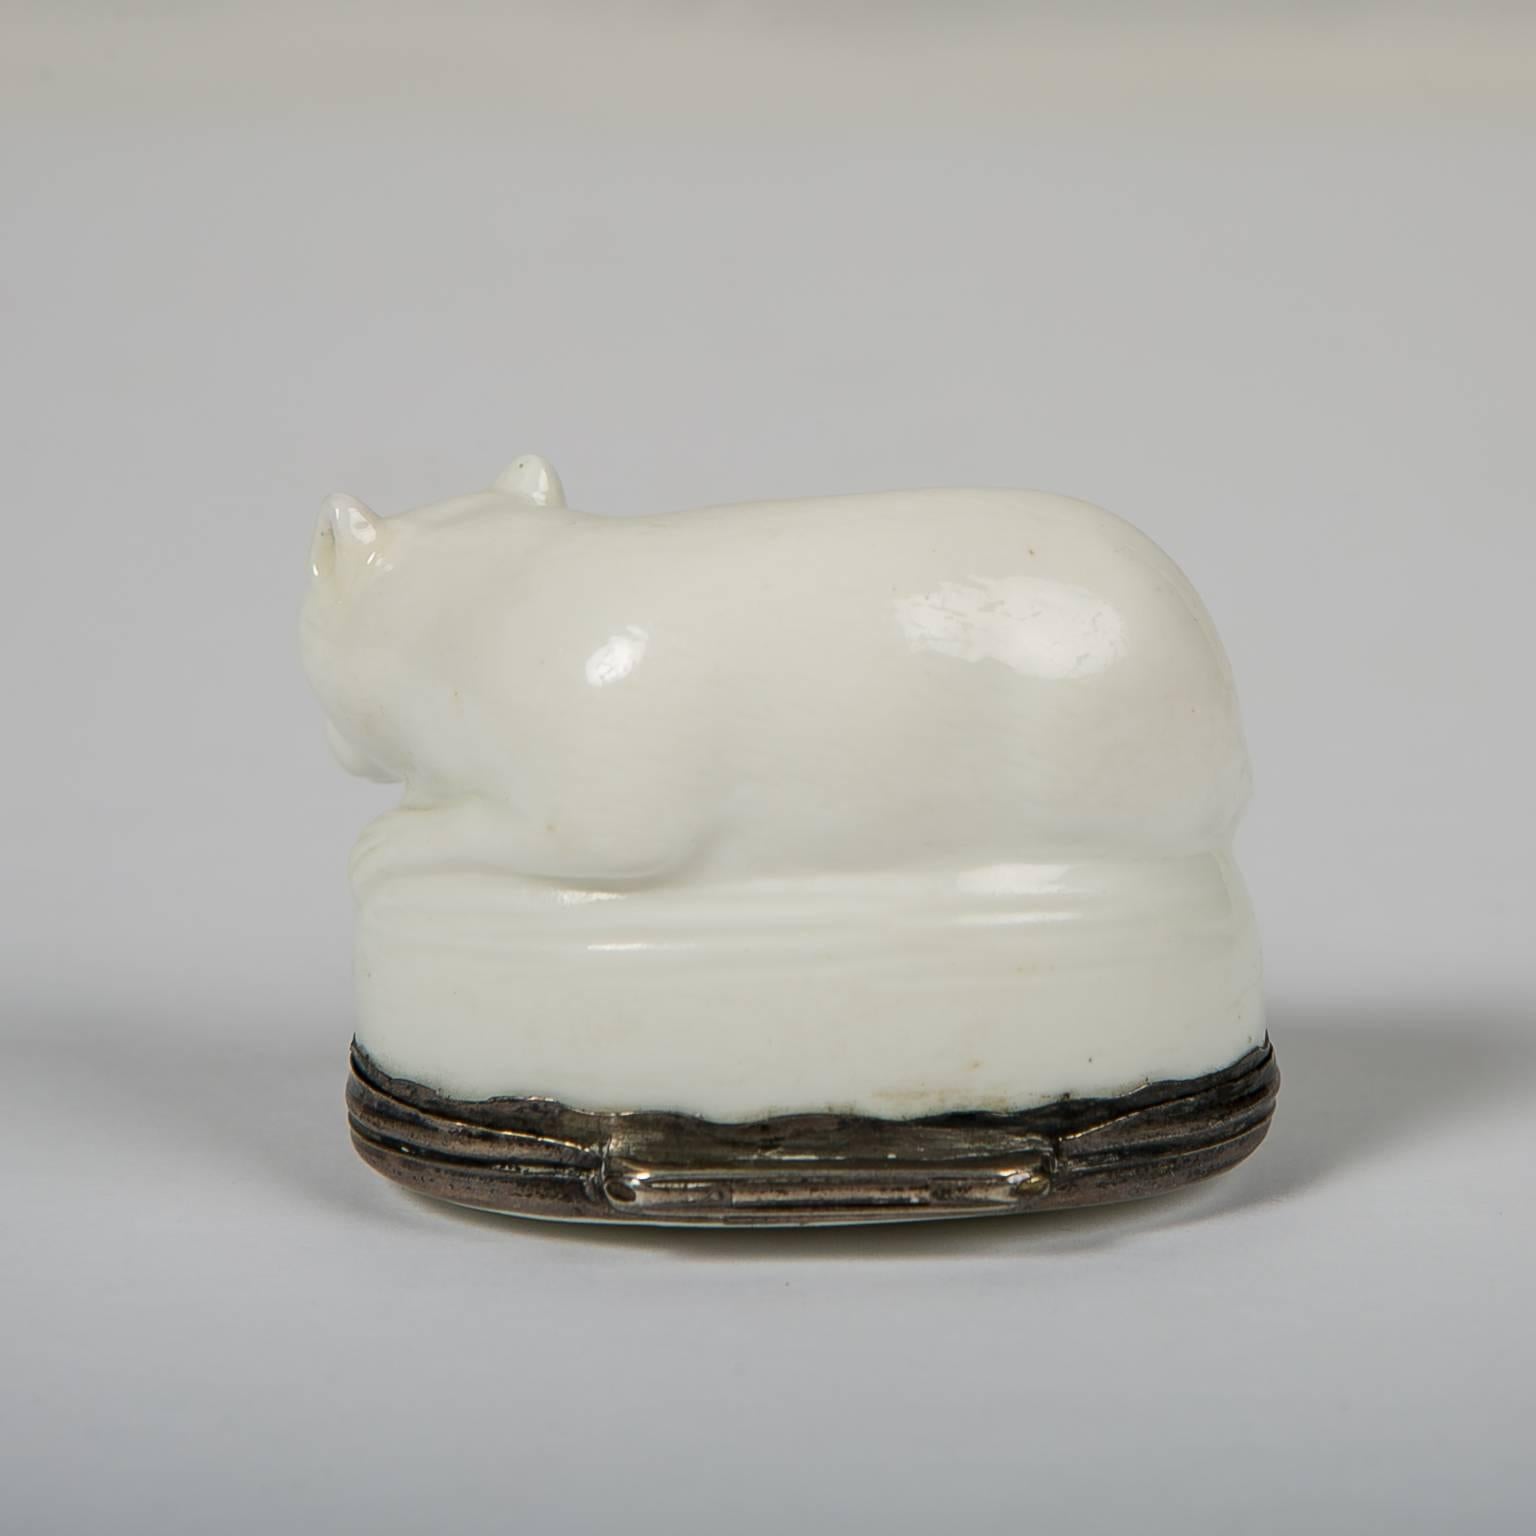 A rare mid-18th century French porcelain snuff box naturalistically modeled as a dog, possibly a pit bull, with fine lines delineating the dog's fur along the sides. The Mennecy Porcelain Manufactory was one of the first French porcelain factories.